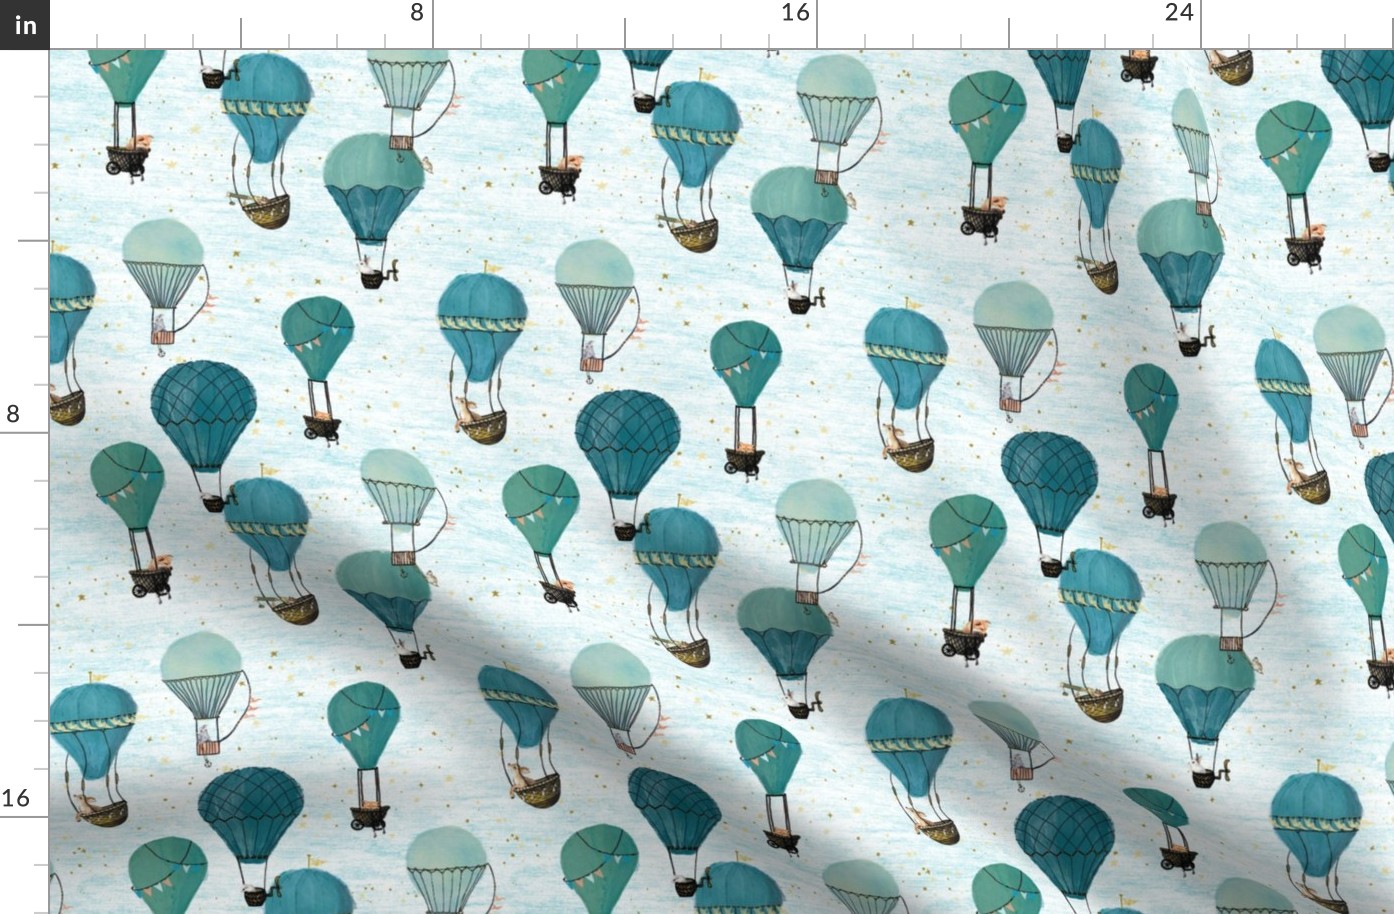 Small Scale Forest Animal Hot Air Balloon Ride Day Adventure, turquoise, Vintage unisex kids nursery 